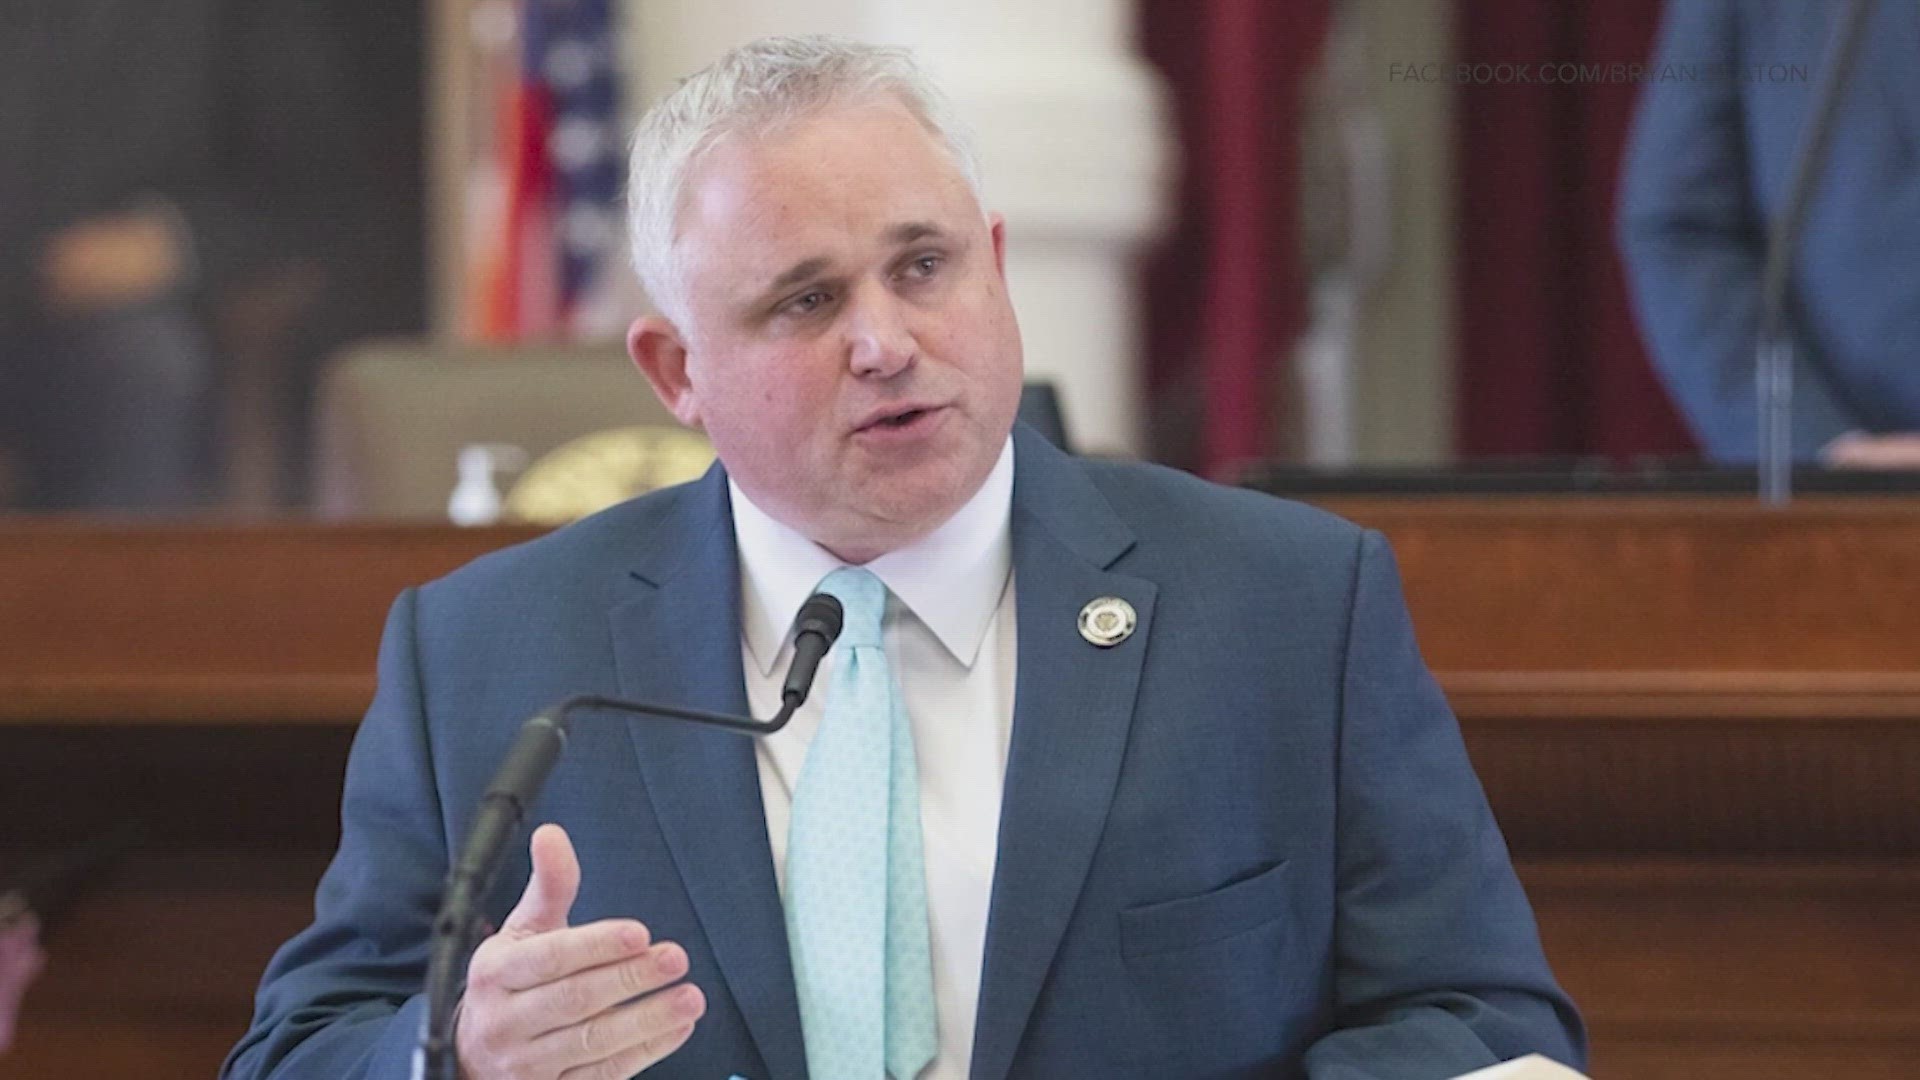 Slaton is now the first Texas House member to be expelled since 1927.